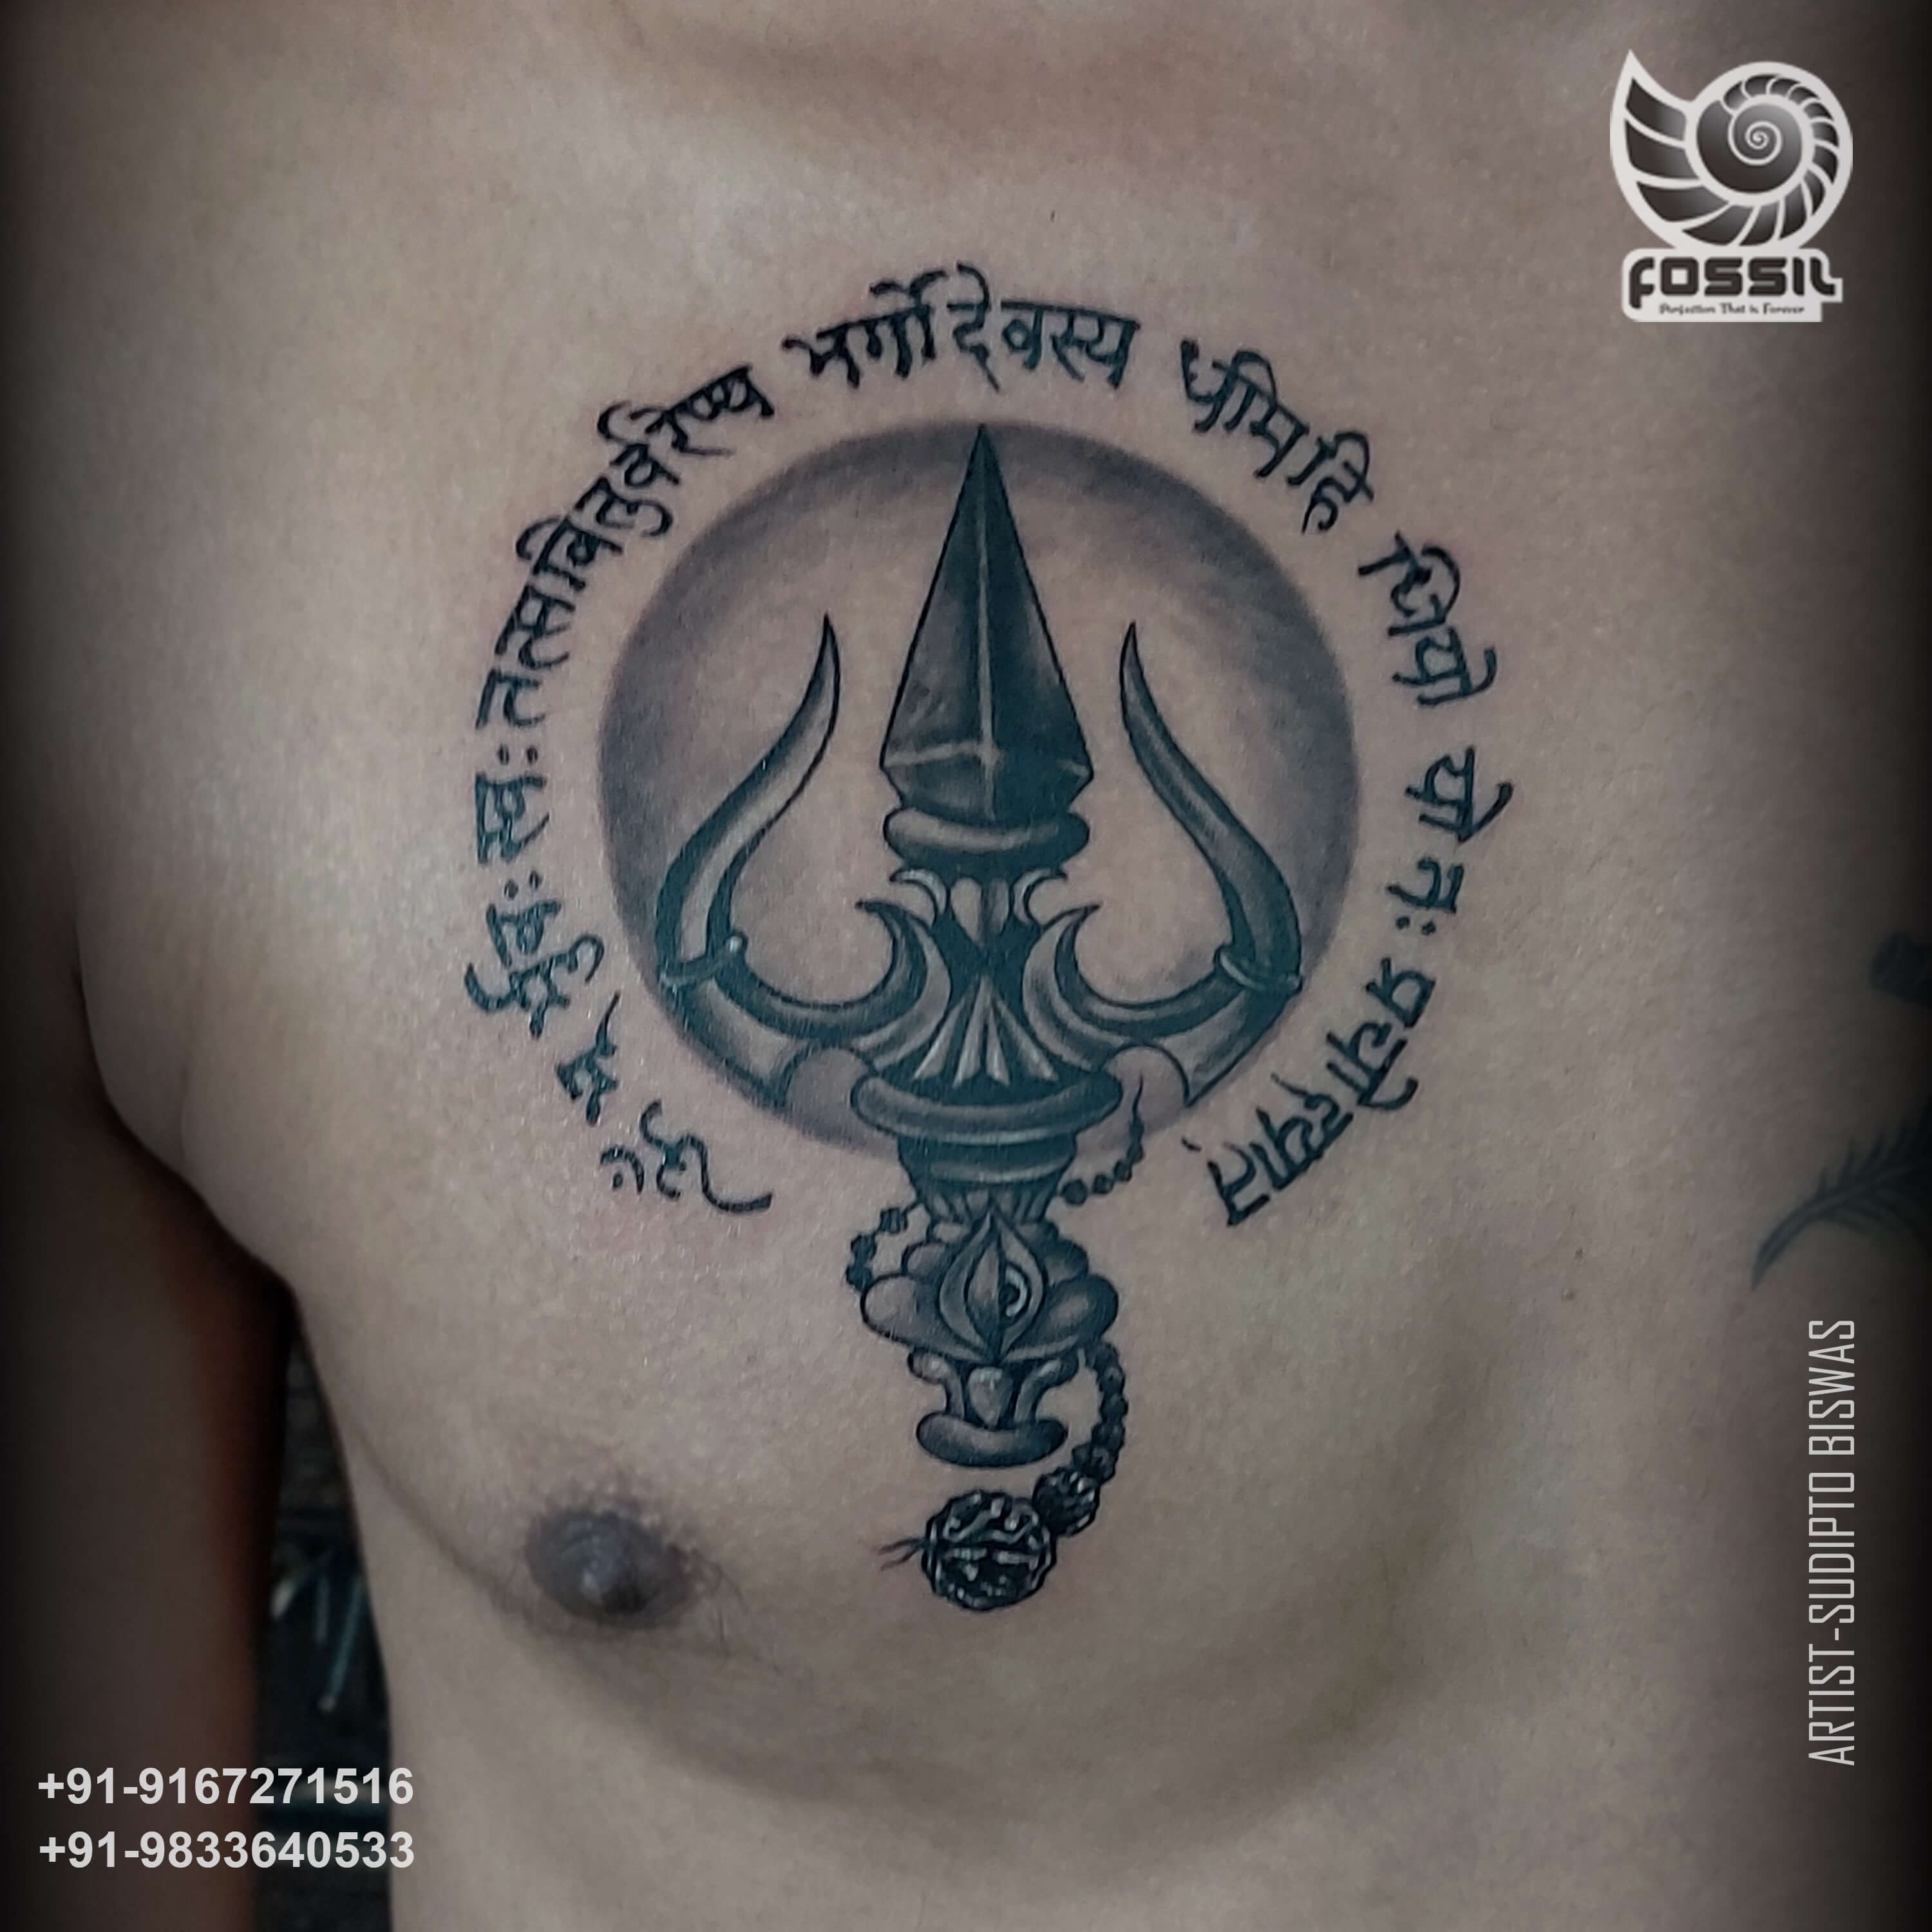 The Changing Trend of Tattoos among South Asians | DESIblitz